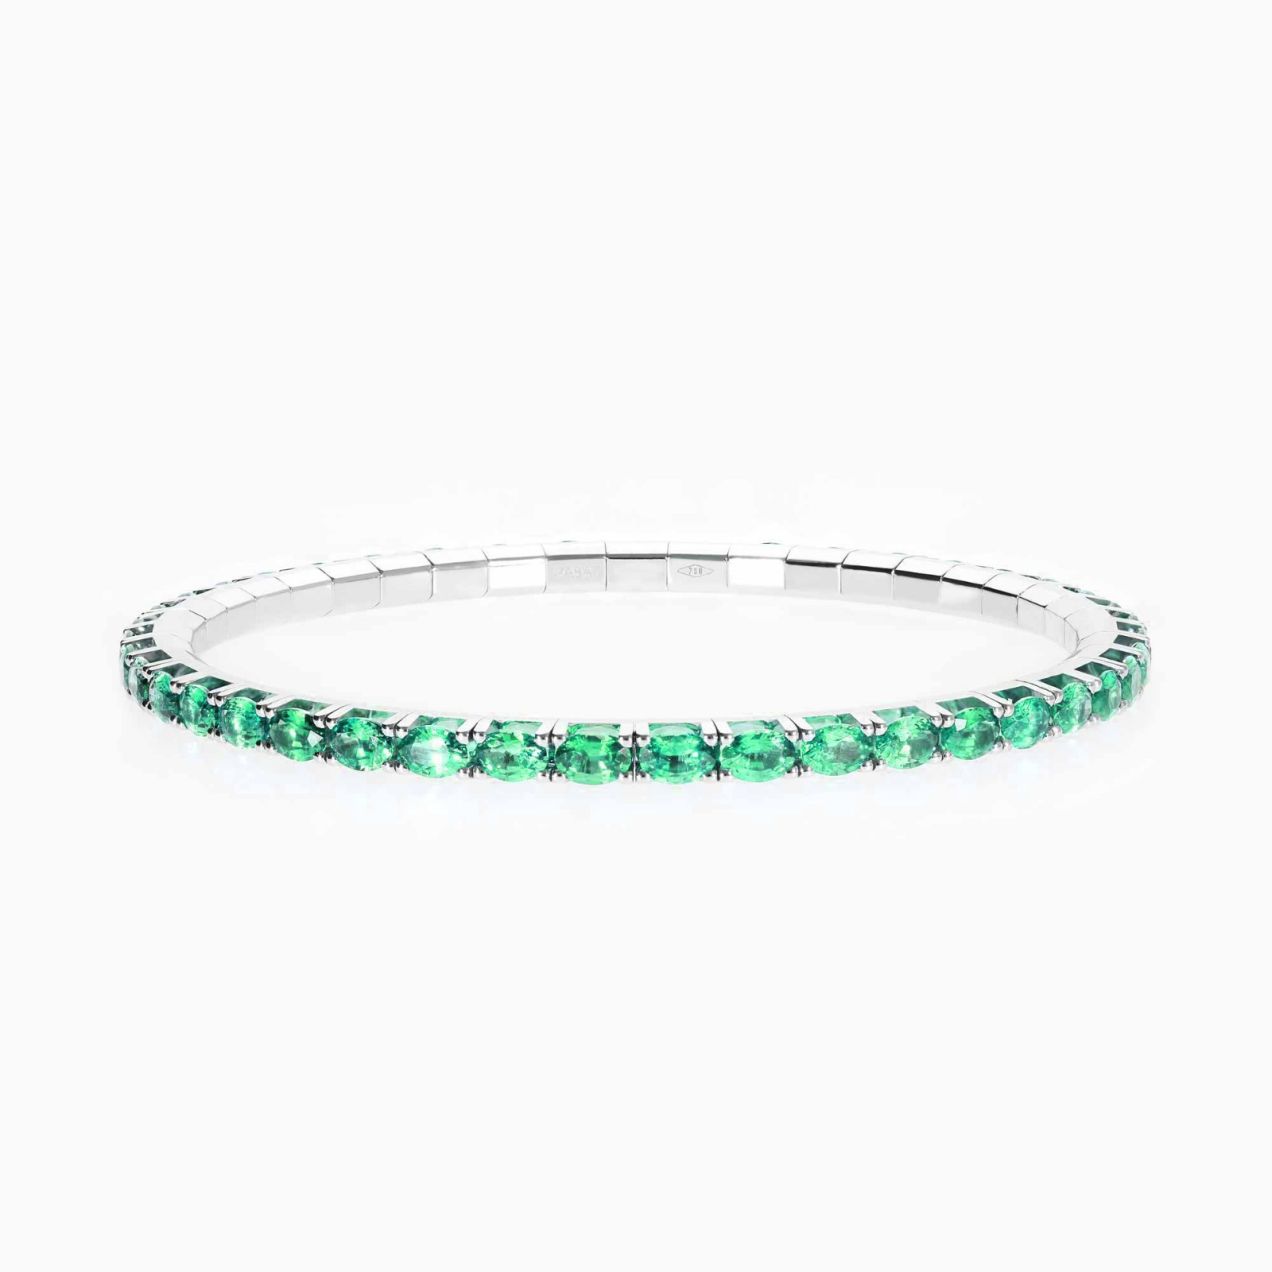 White gold riviere bracelet with oval cut tsavorites